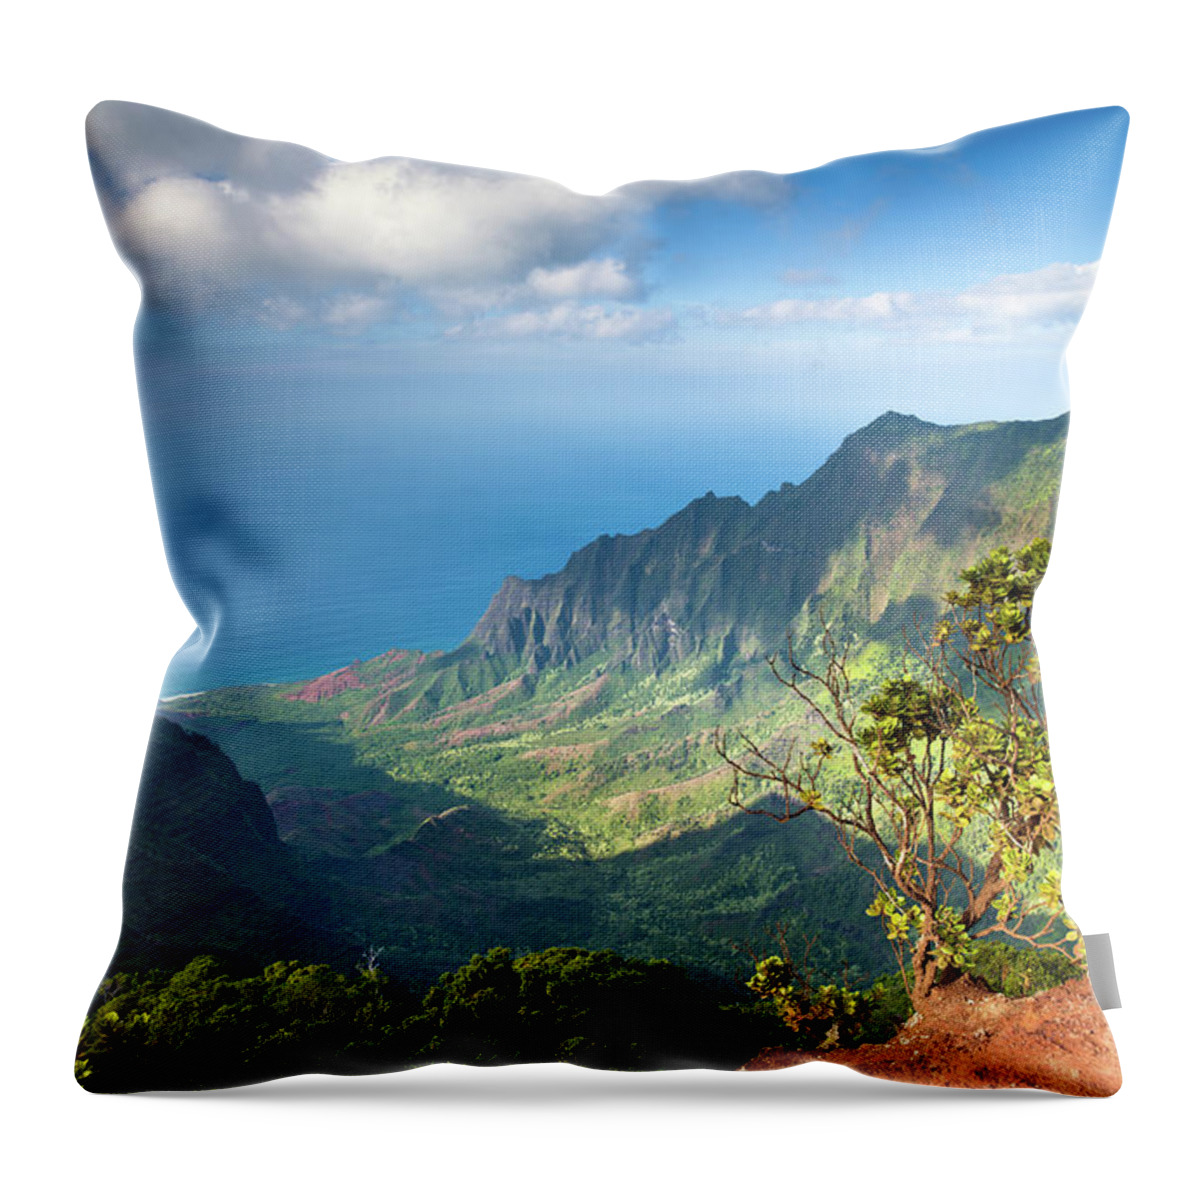 Scenics Throw Pillow featuring the photograph Kauai Na Pali Coast View Pacific Ocean by Mlenny